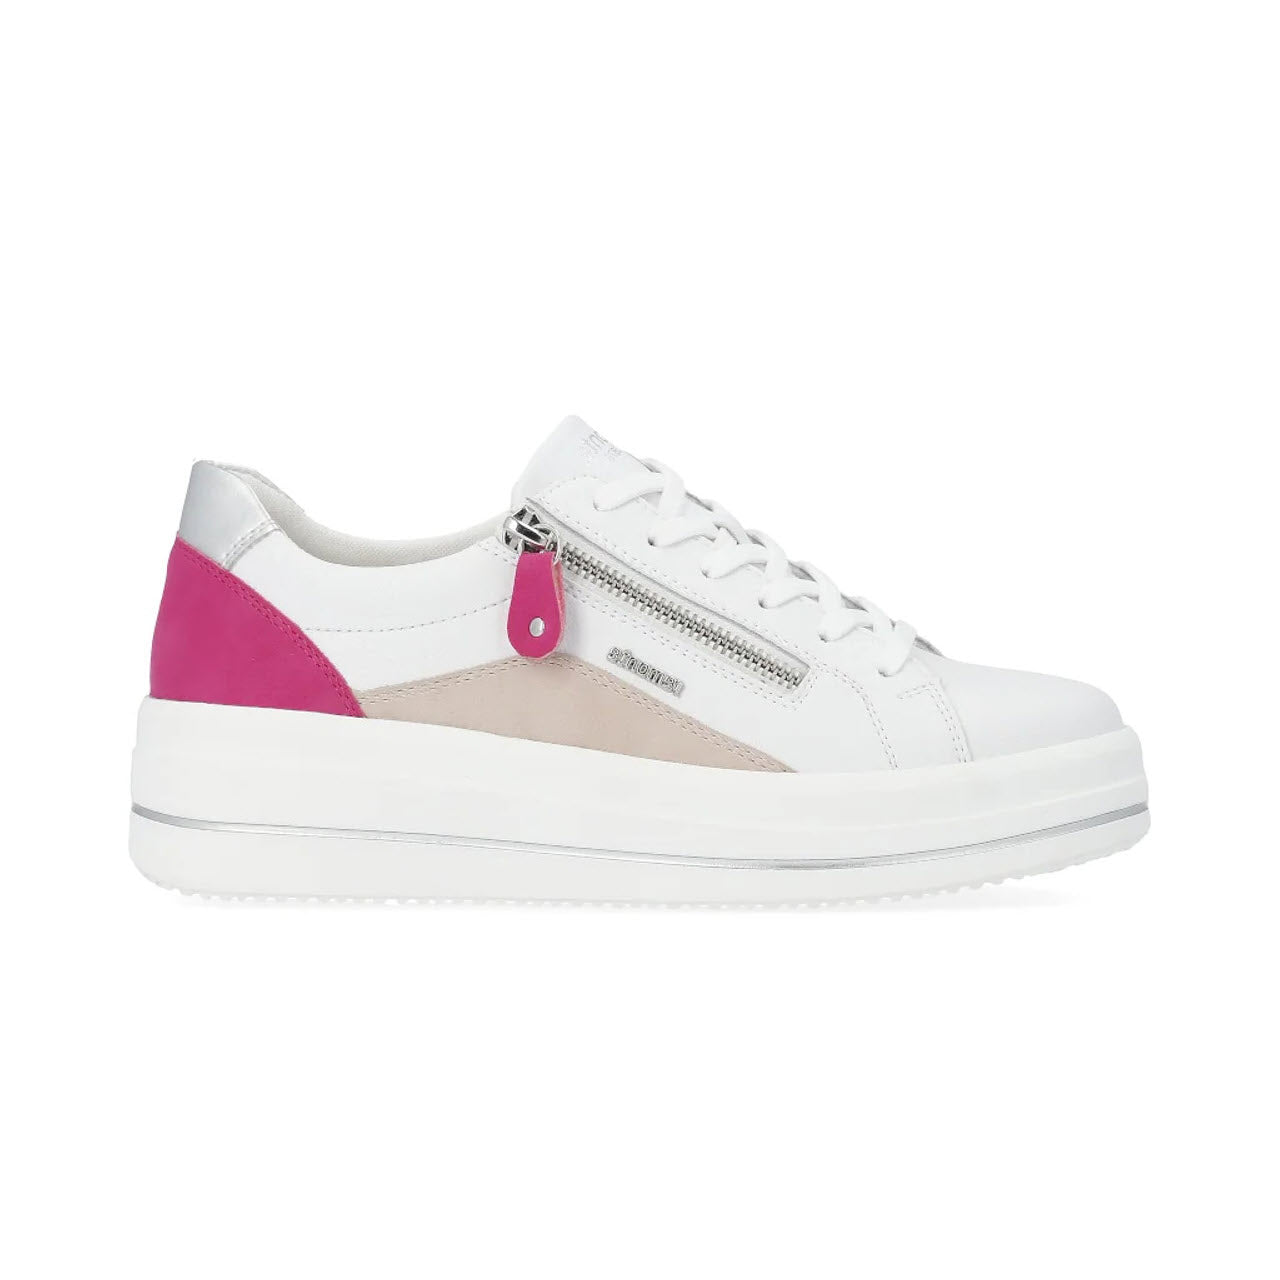 The Remonte REMONTE EURO COURT SNEAKER FUCHSIA MULTI - WOMENS is a white sneaker with pink accents on the heel, a silver zipper on the side, and a thick white sole. Crafted from durable coated leather, this wedge casual shoe offers both style and resilience.